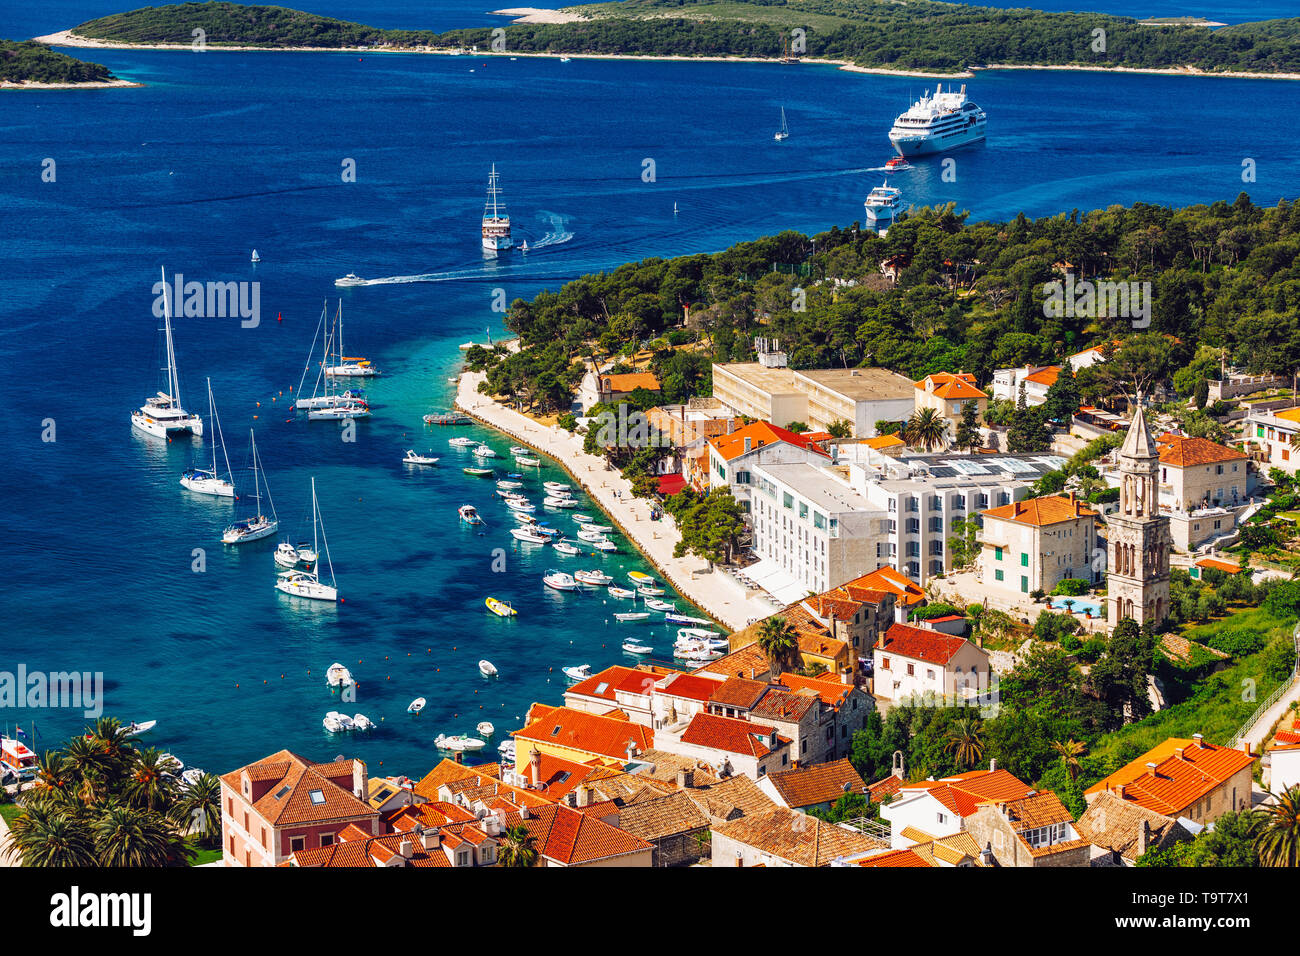 View at amazing archipelago with boats in front of town Hvar, Croatia. Harbor of old Adriatic island town Hvar. Popular touristic destination of Croat Stock Photo